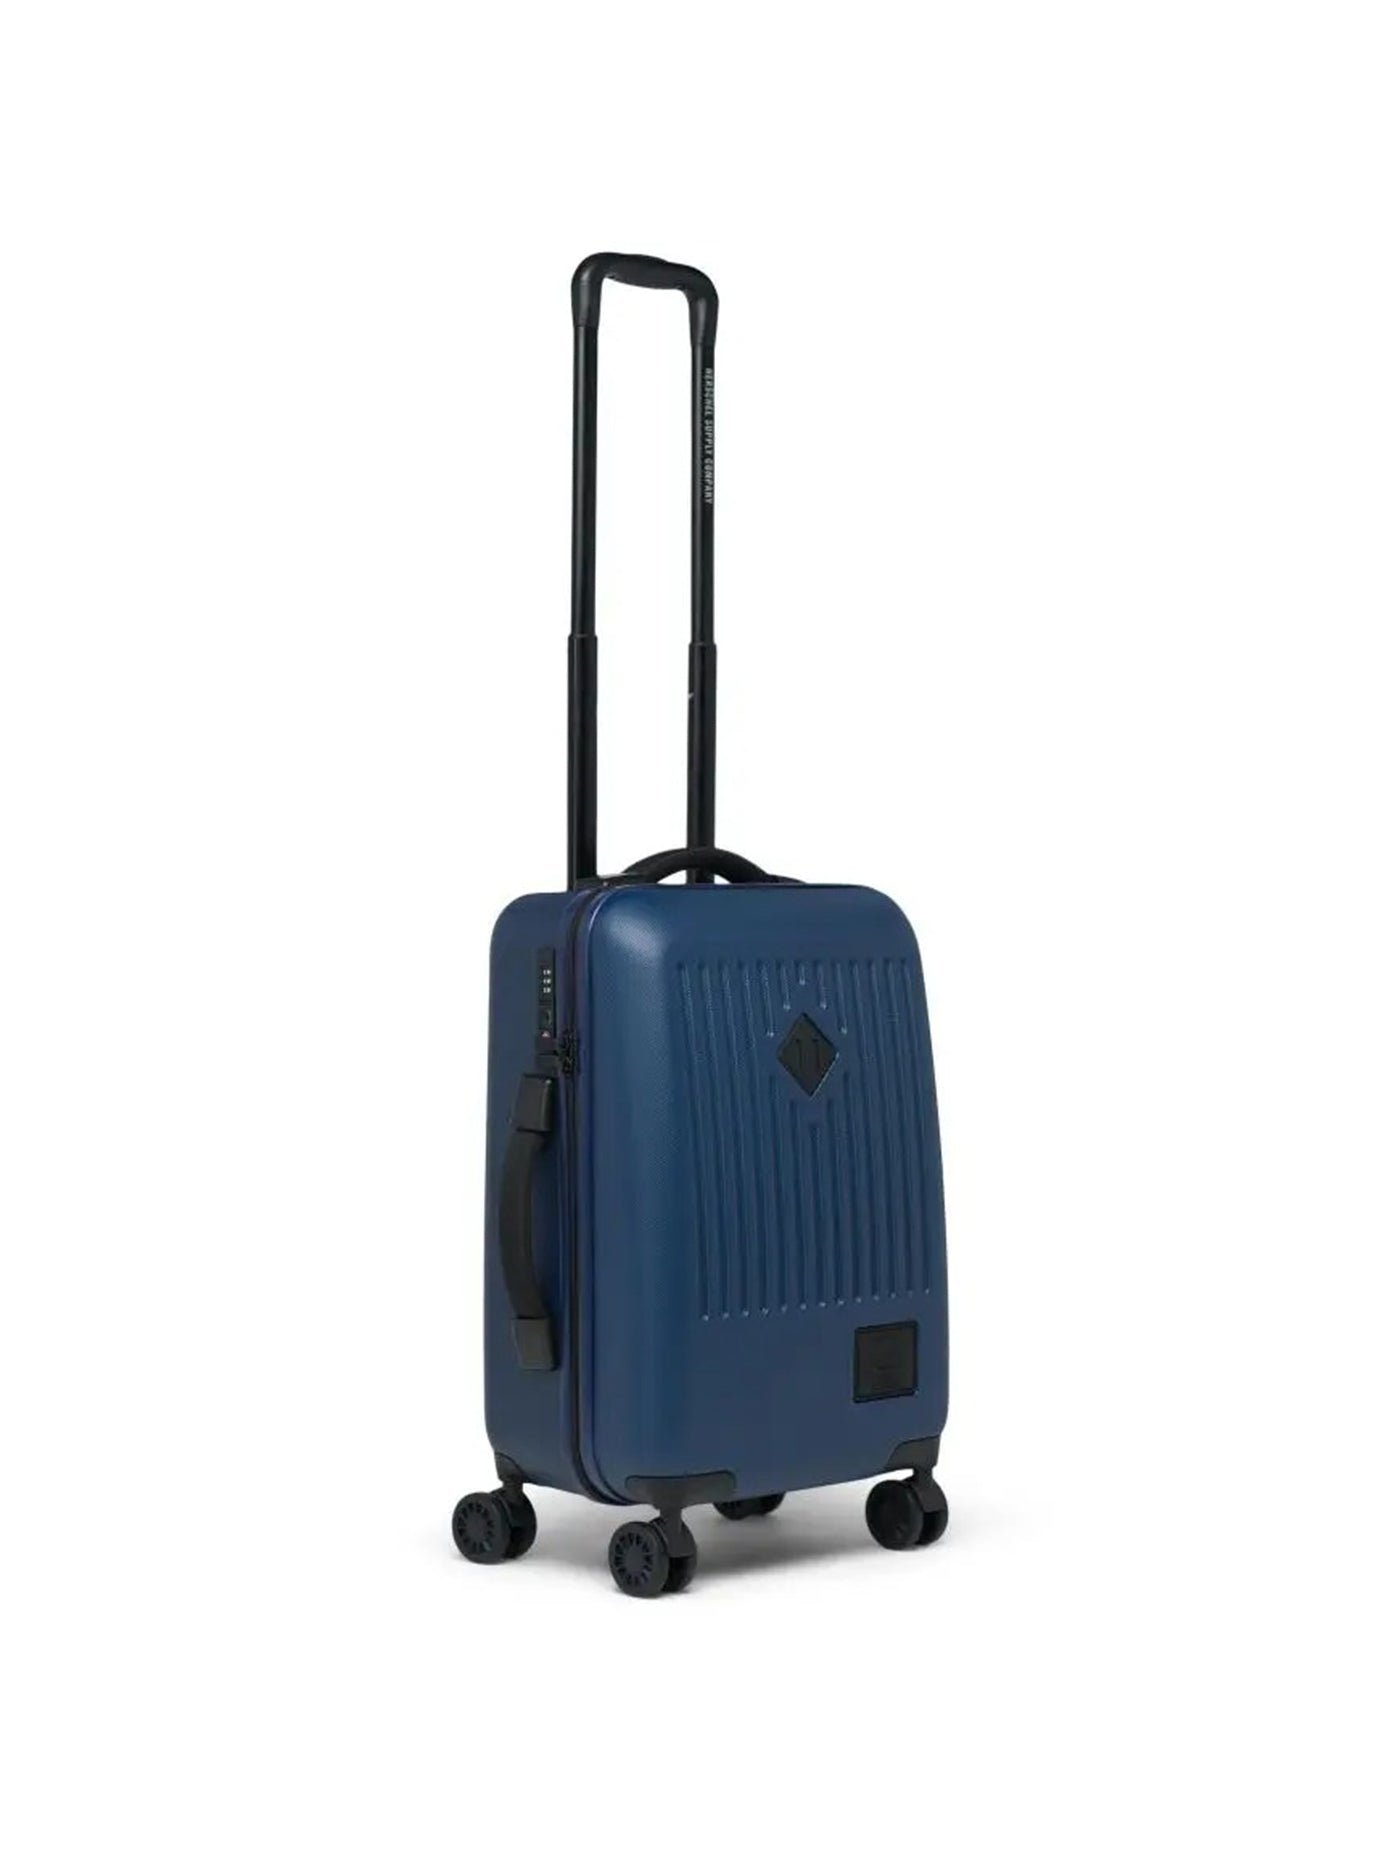 Herschel Trade Carry-On Large Suitcase